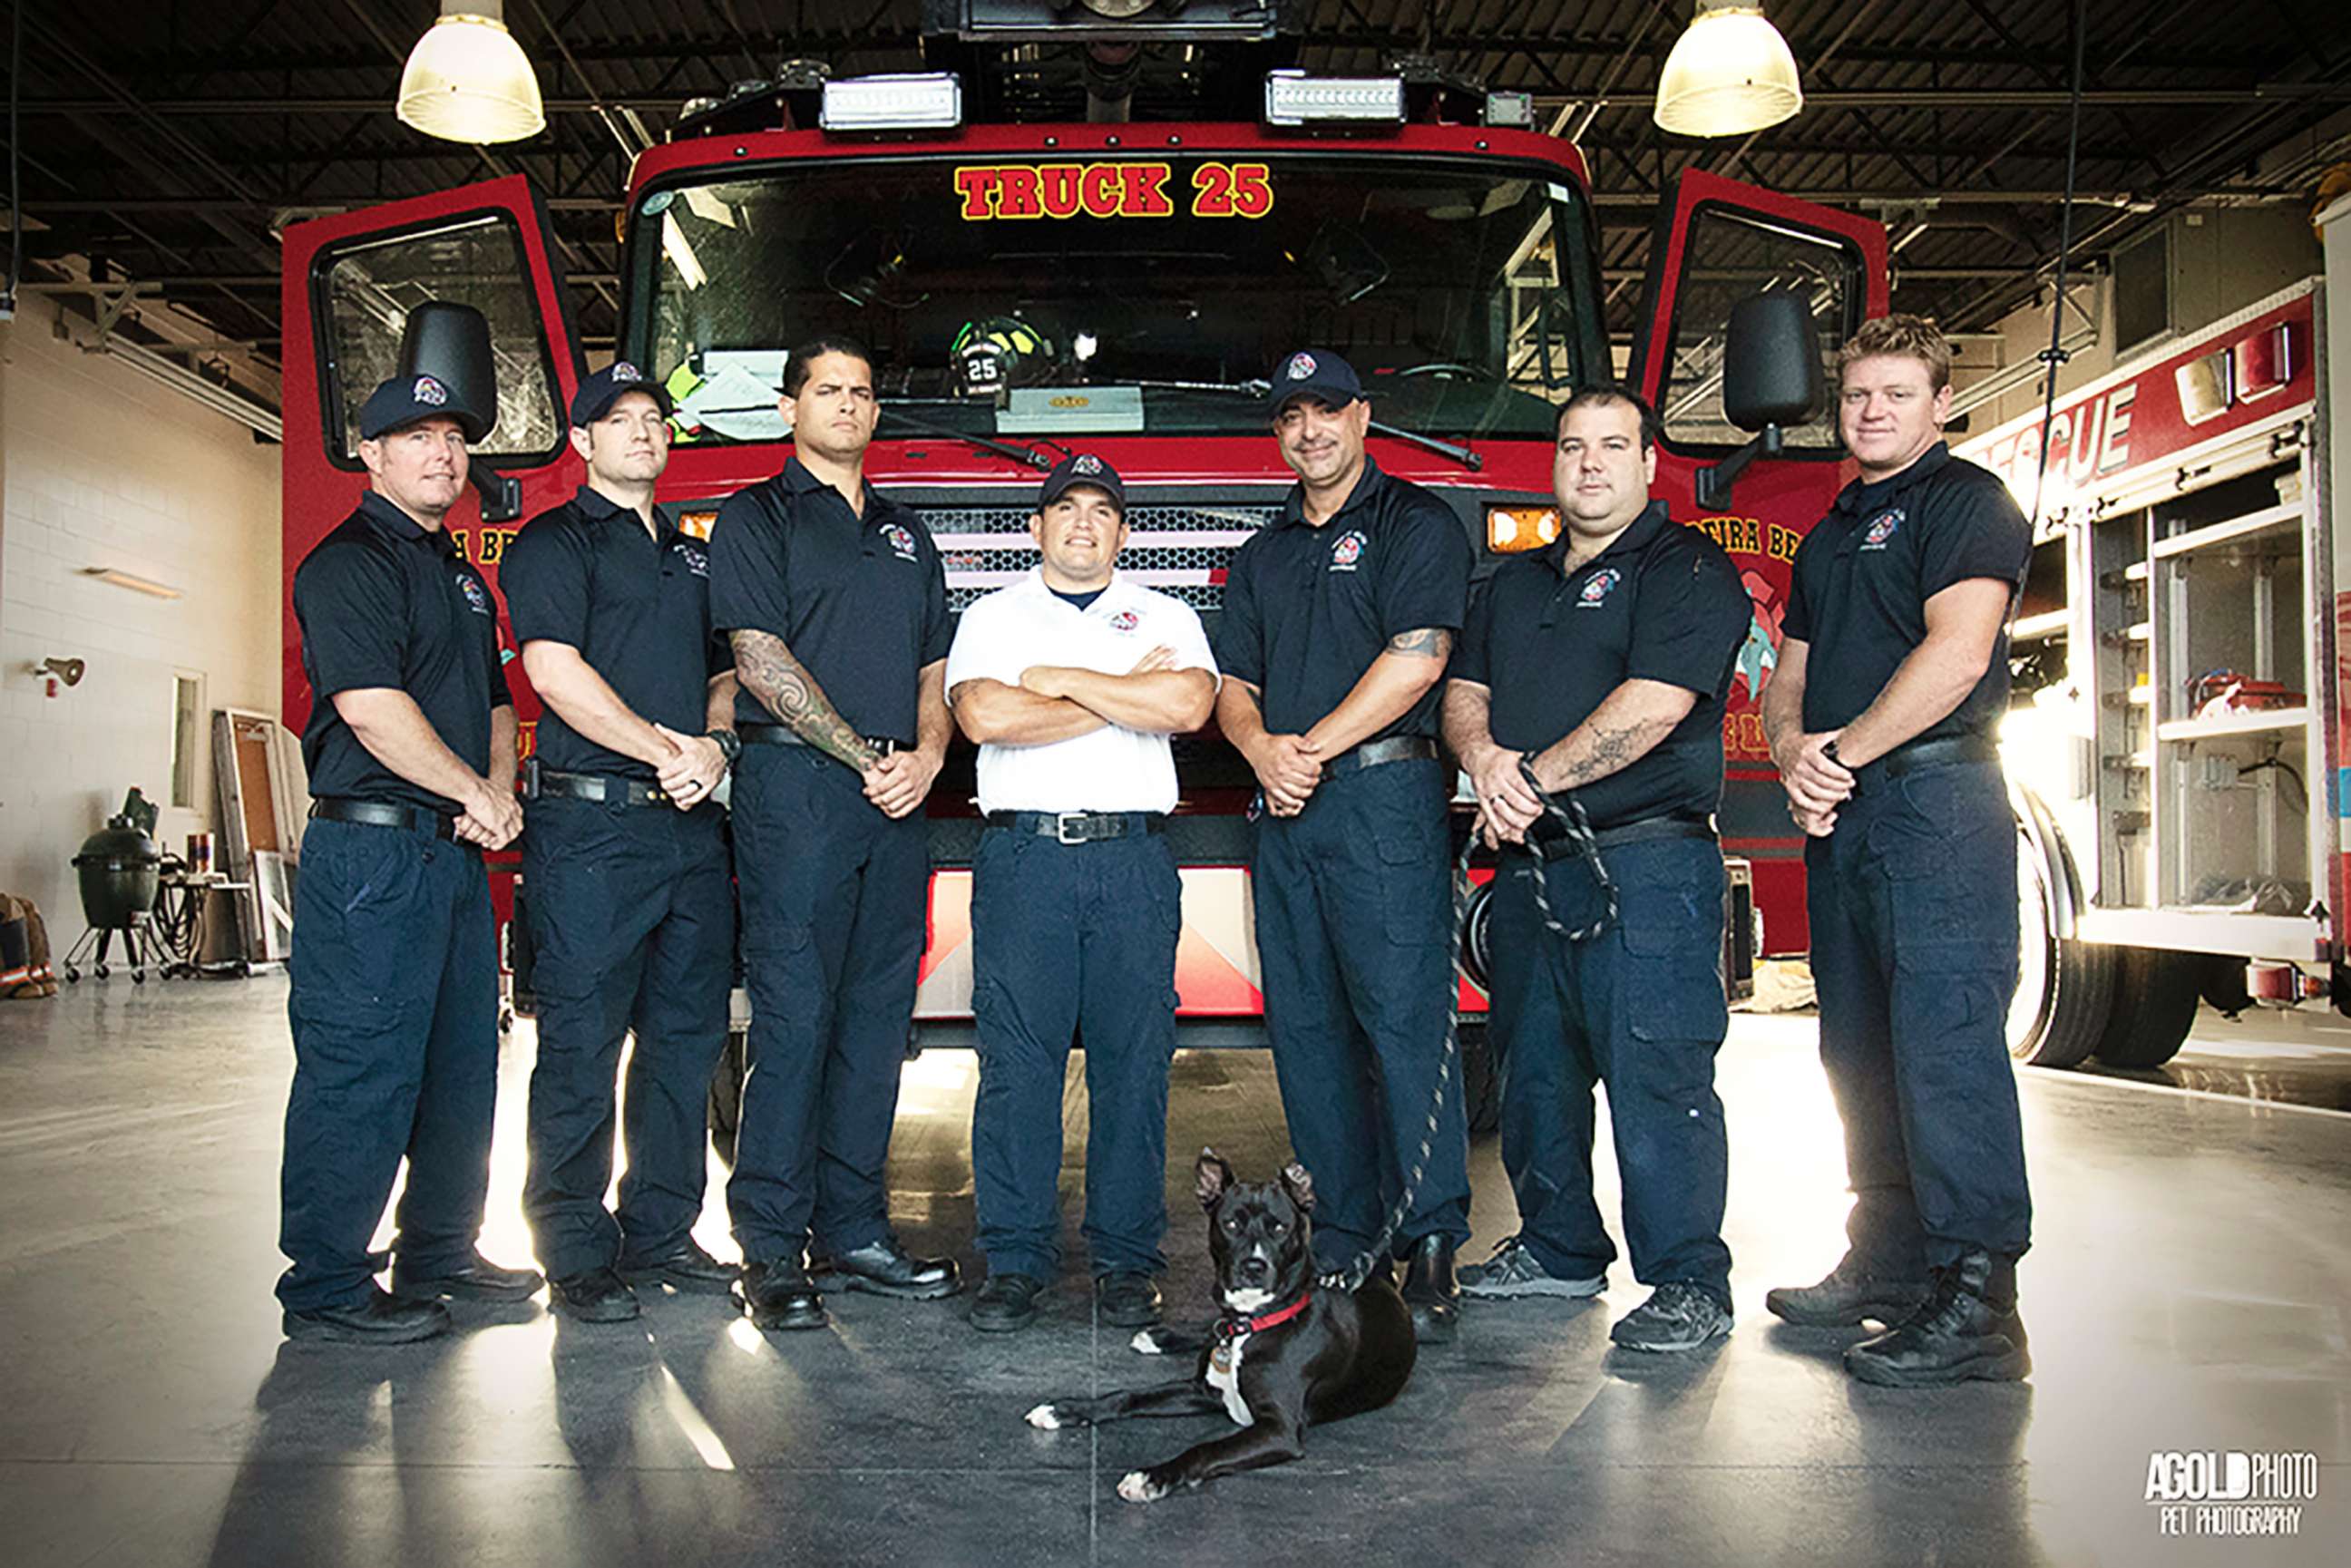 PHOTO: Clover is pictured with fire fighters at Madeira Beach Fire Station in Madeira Beach, Fla.